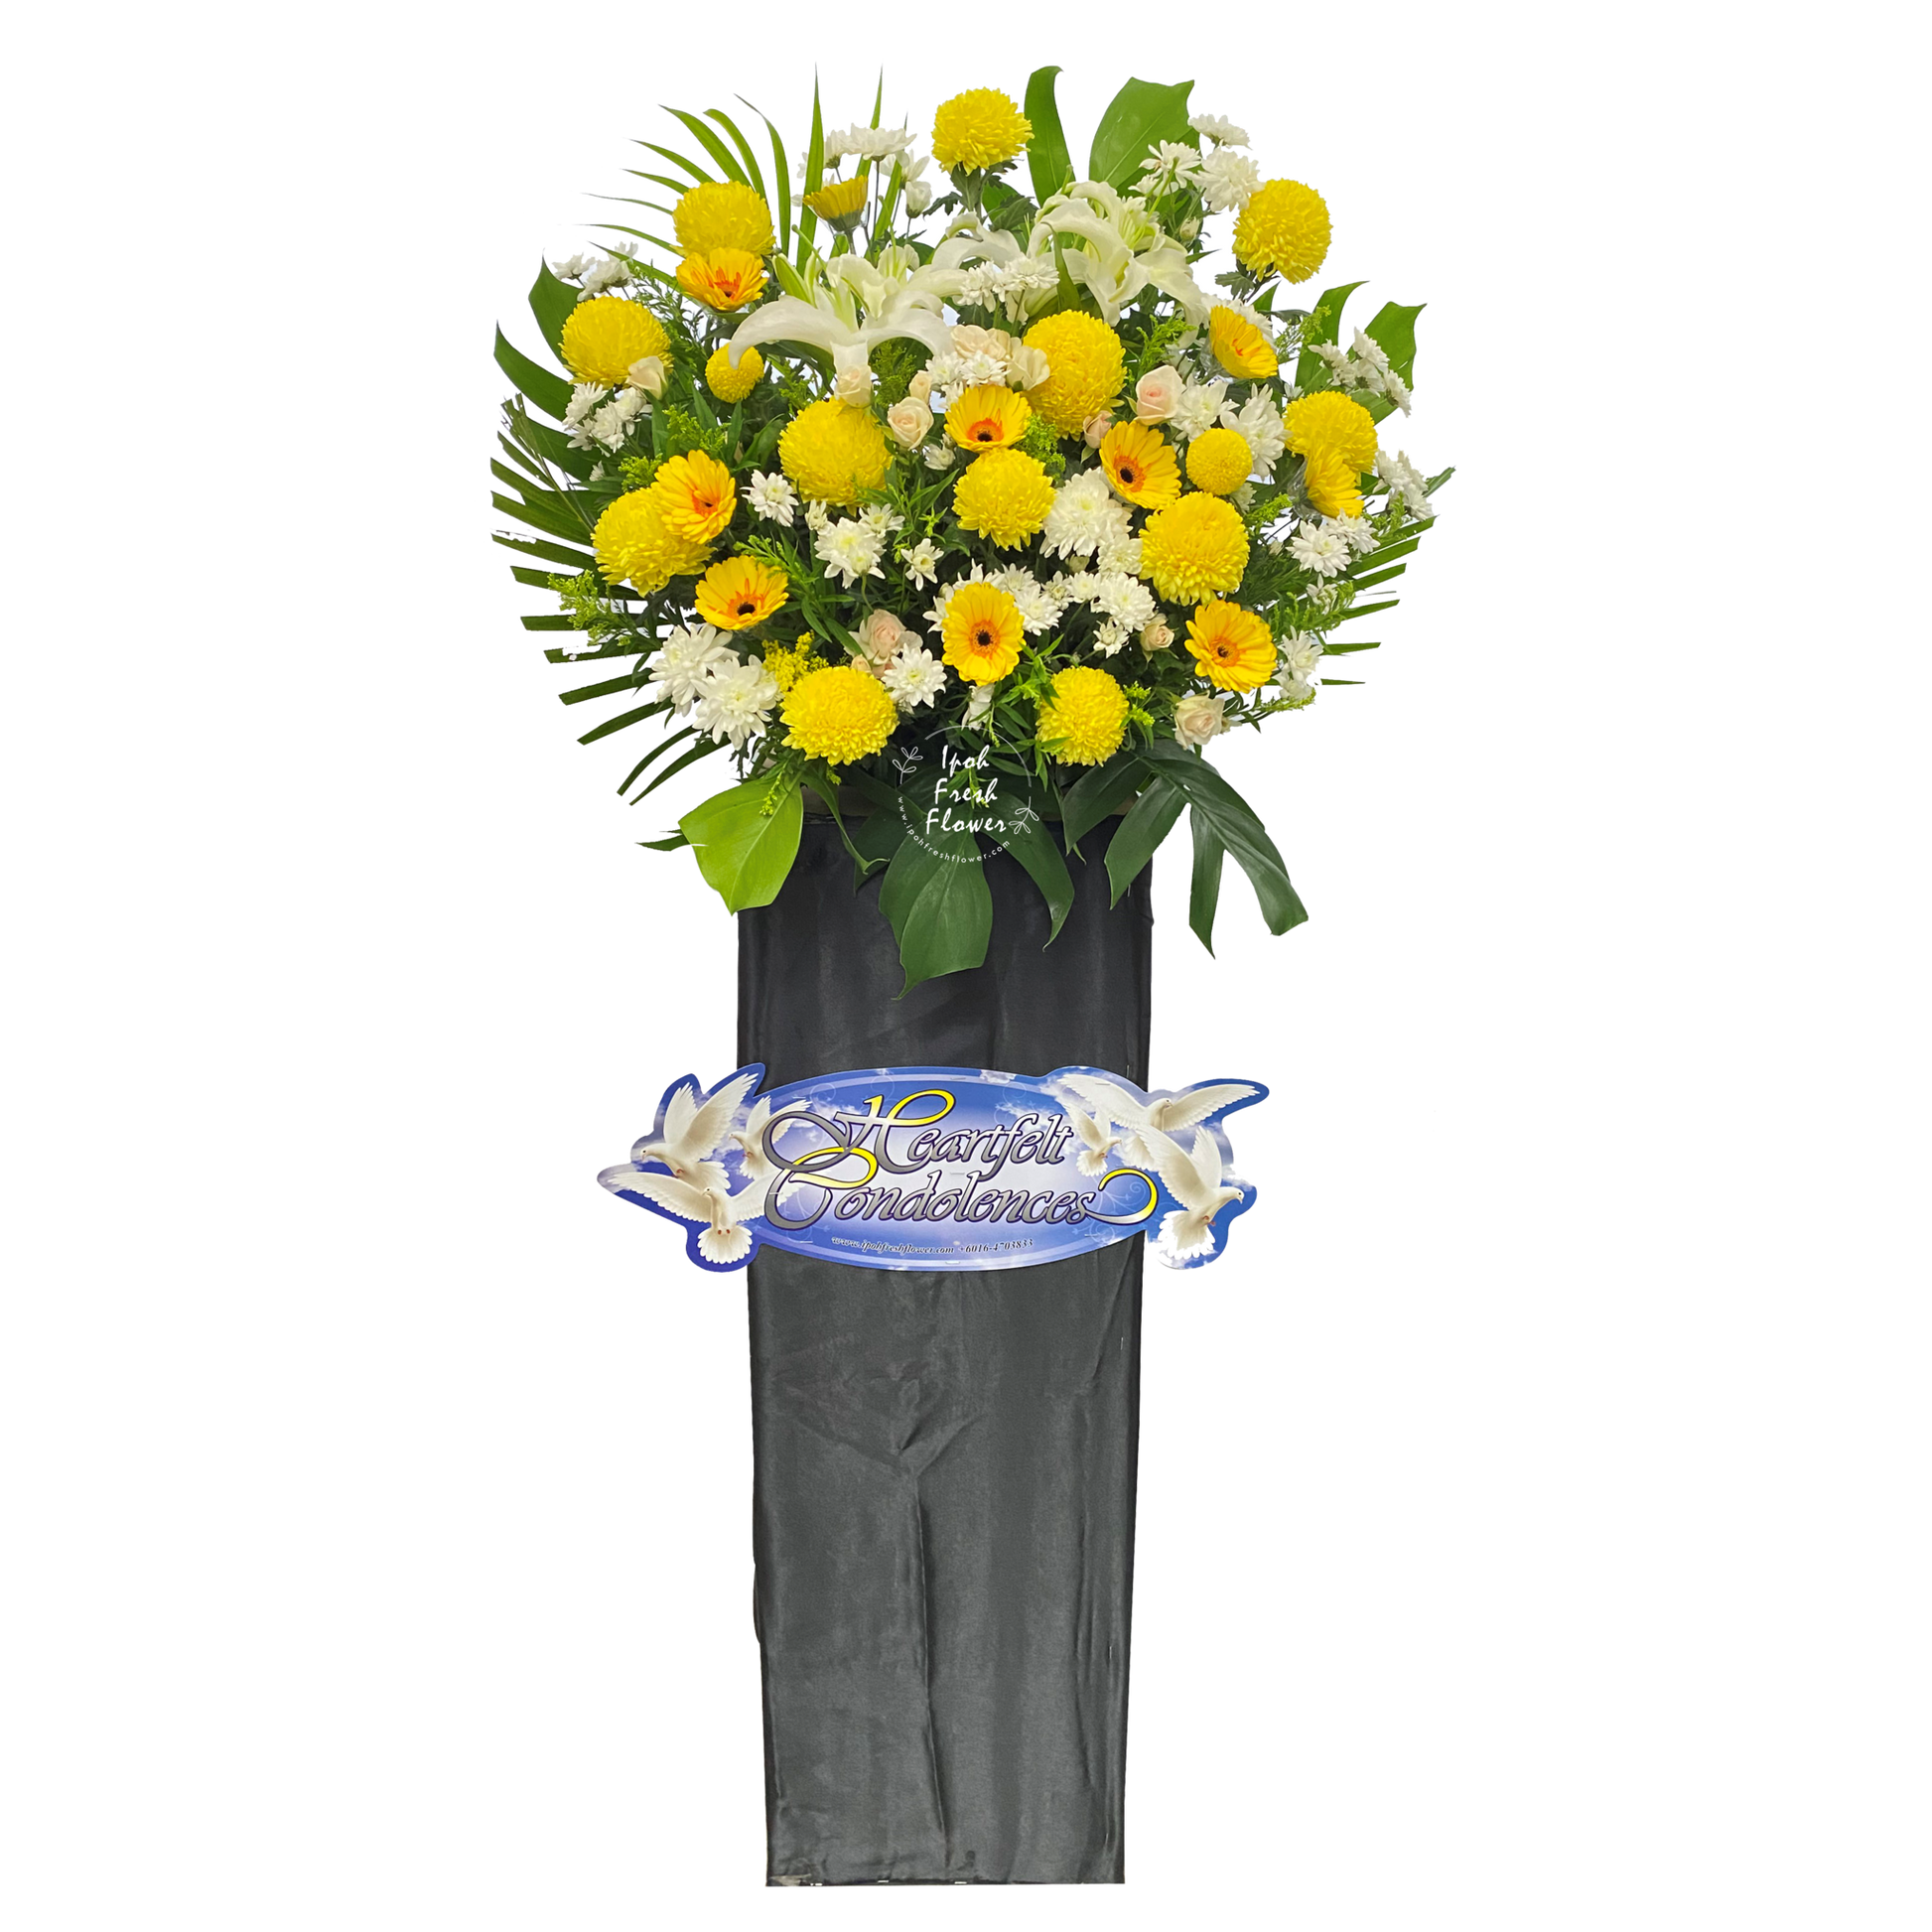 Condolence Wreaths & Funeral Flower Stand B7| Free Delivery